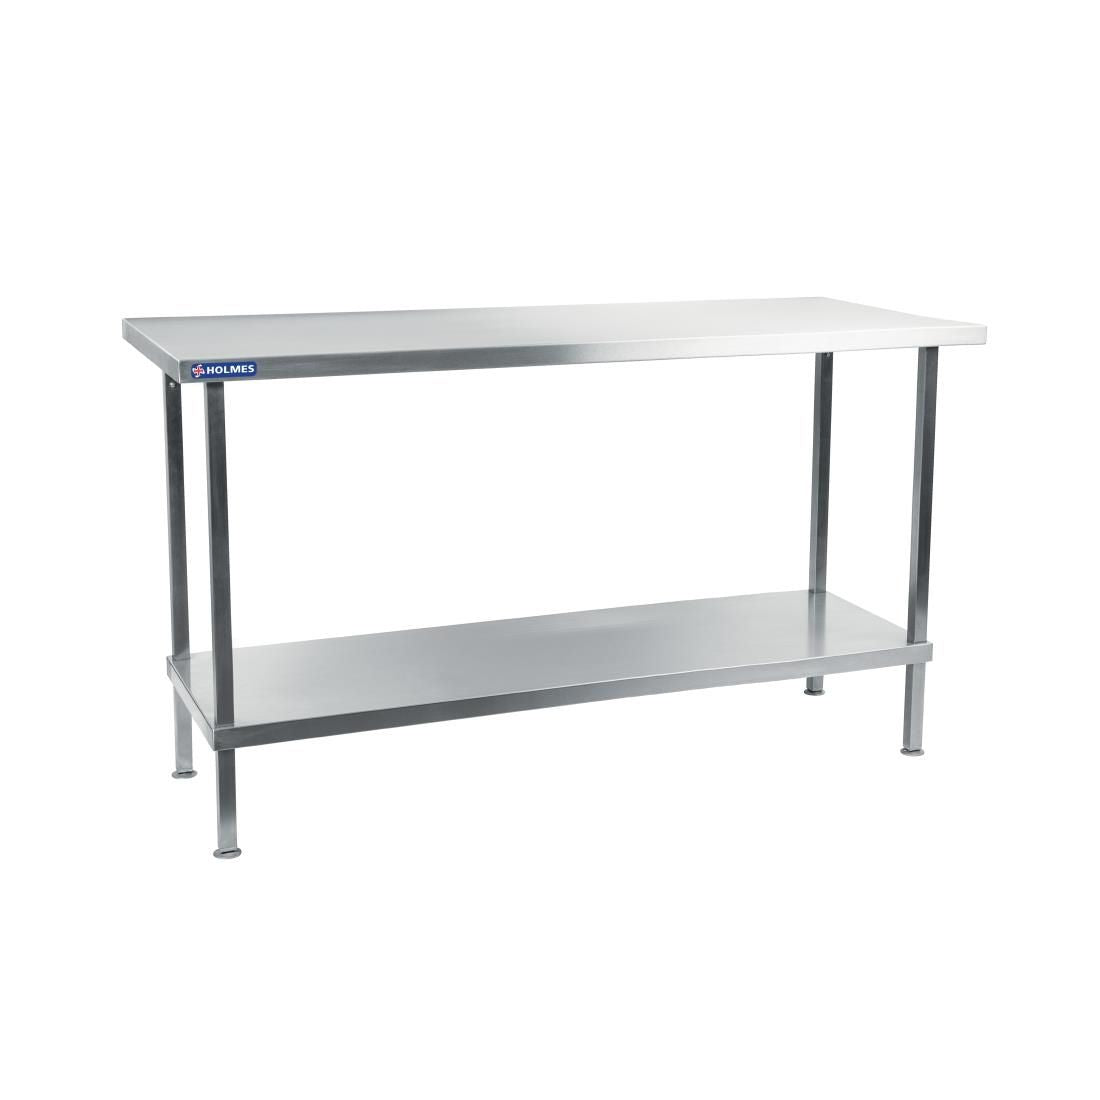 Holmes Self Assembly Stainless Steel Centre Table 600mm - DR347